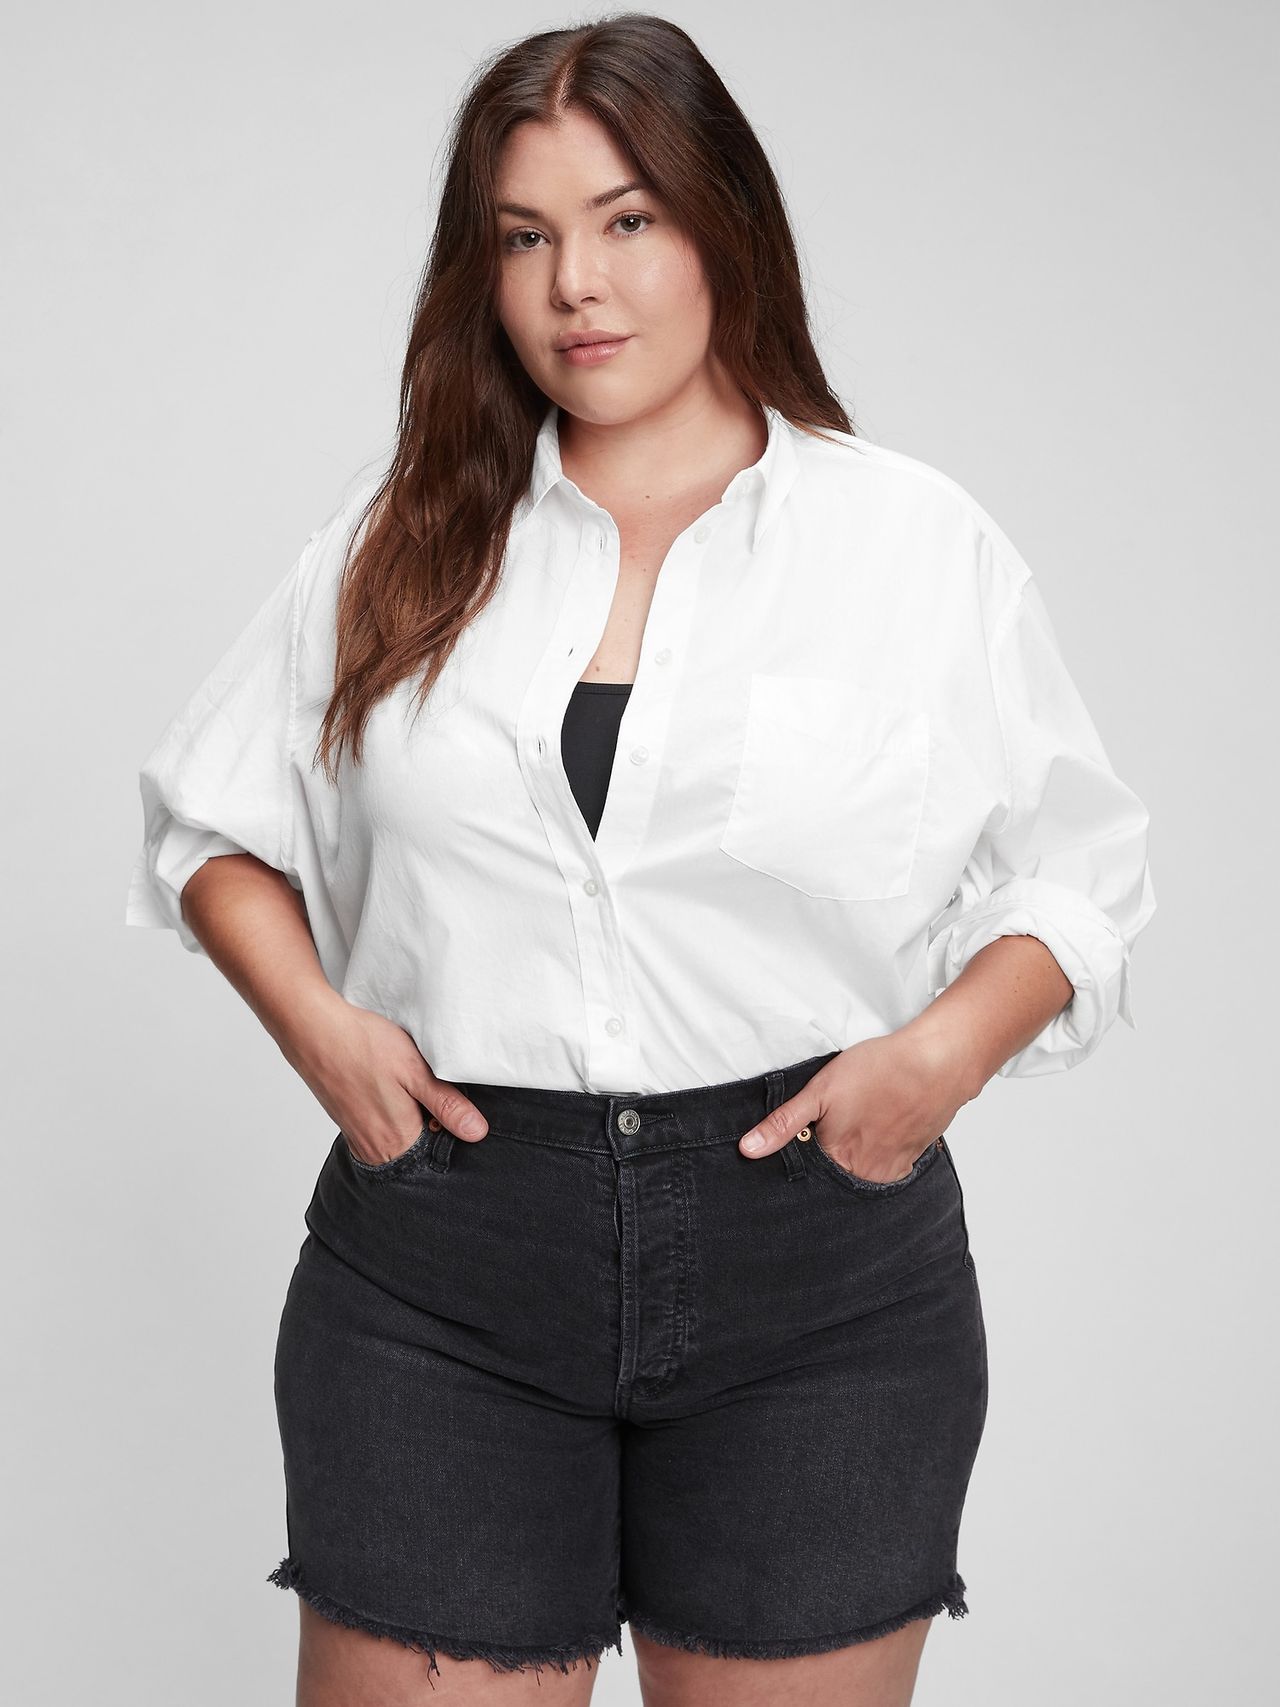 The 23 Best White Shirts for Women and the Brands to Shop | Who What Wear